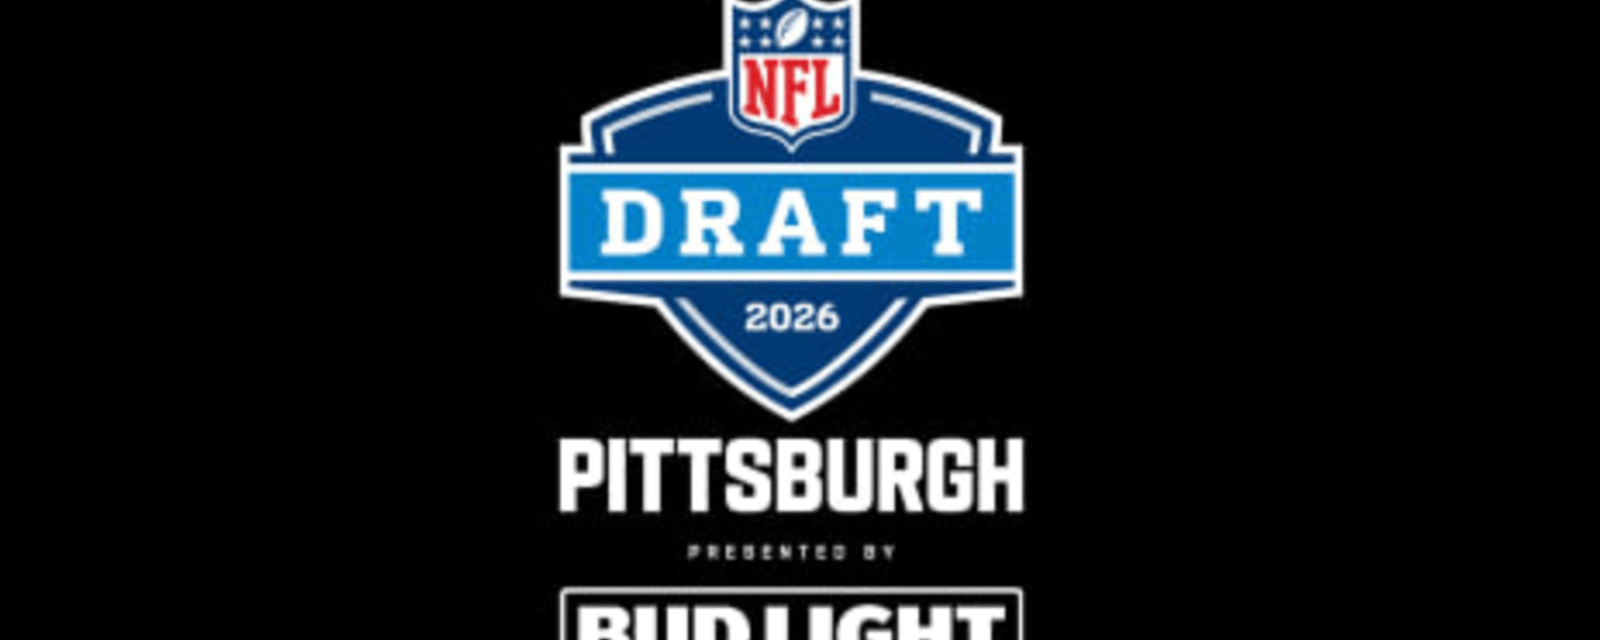 NFL Draft is coming to Pittsburgh! 